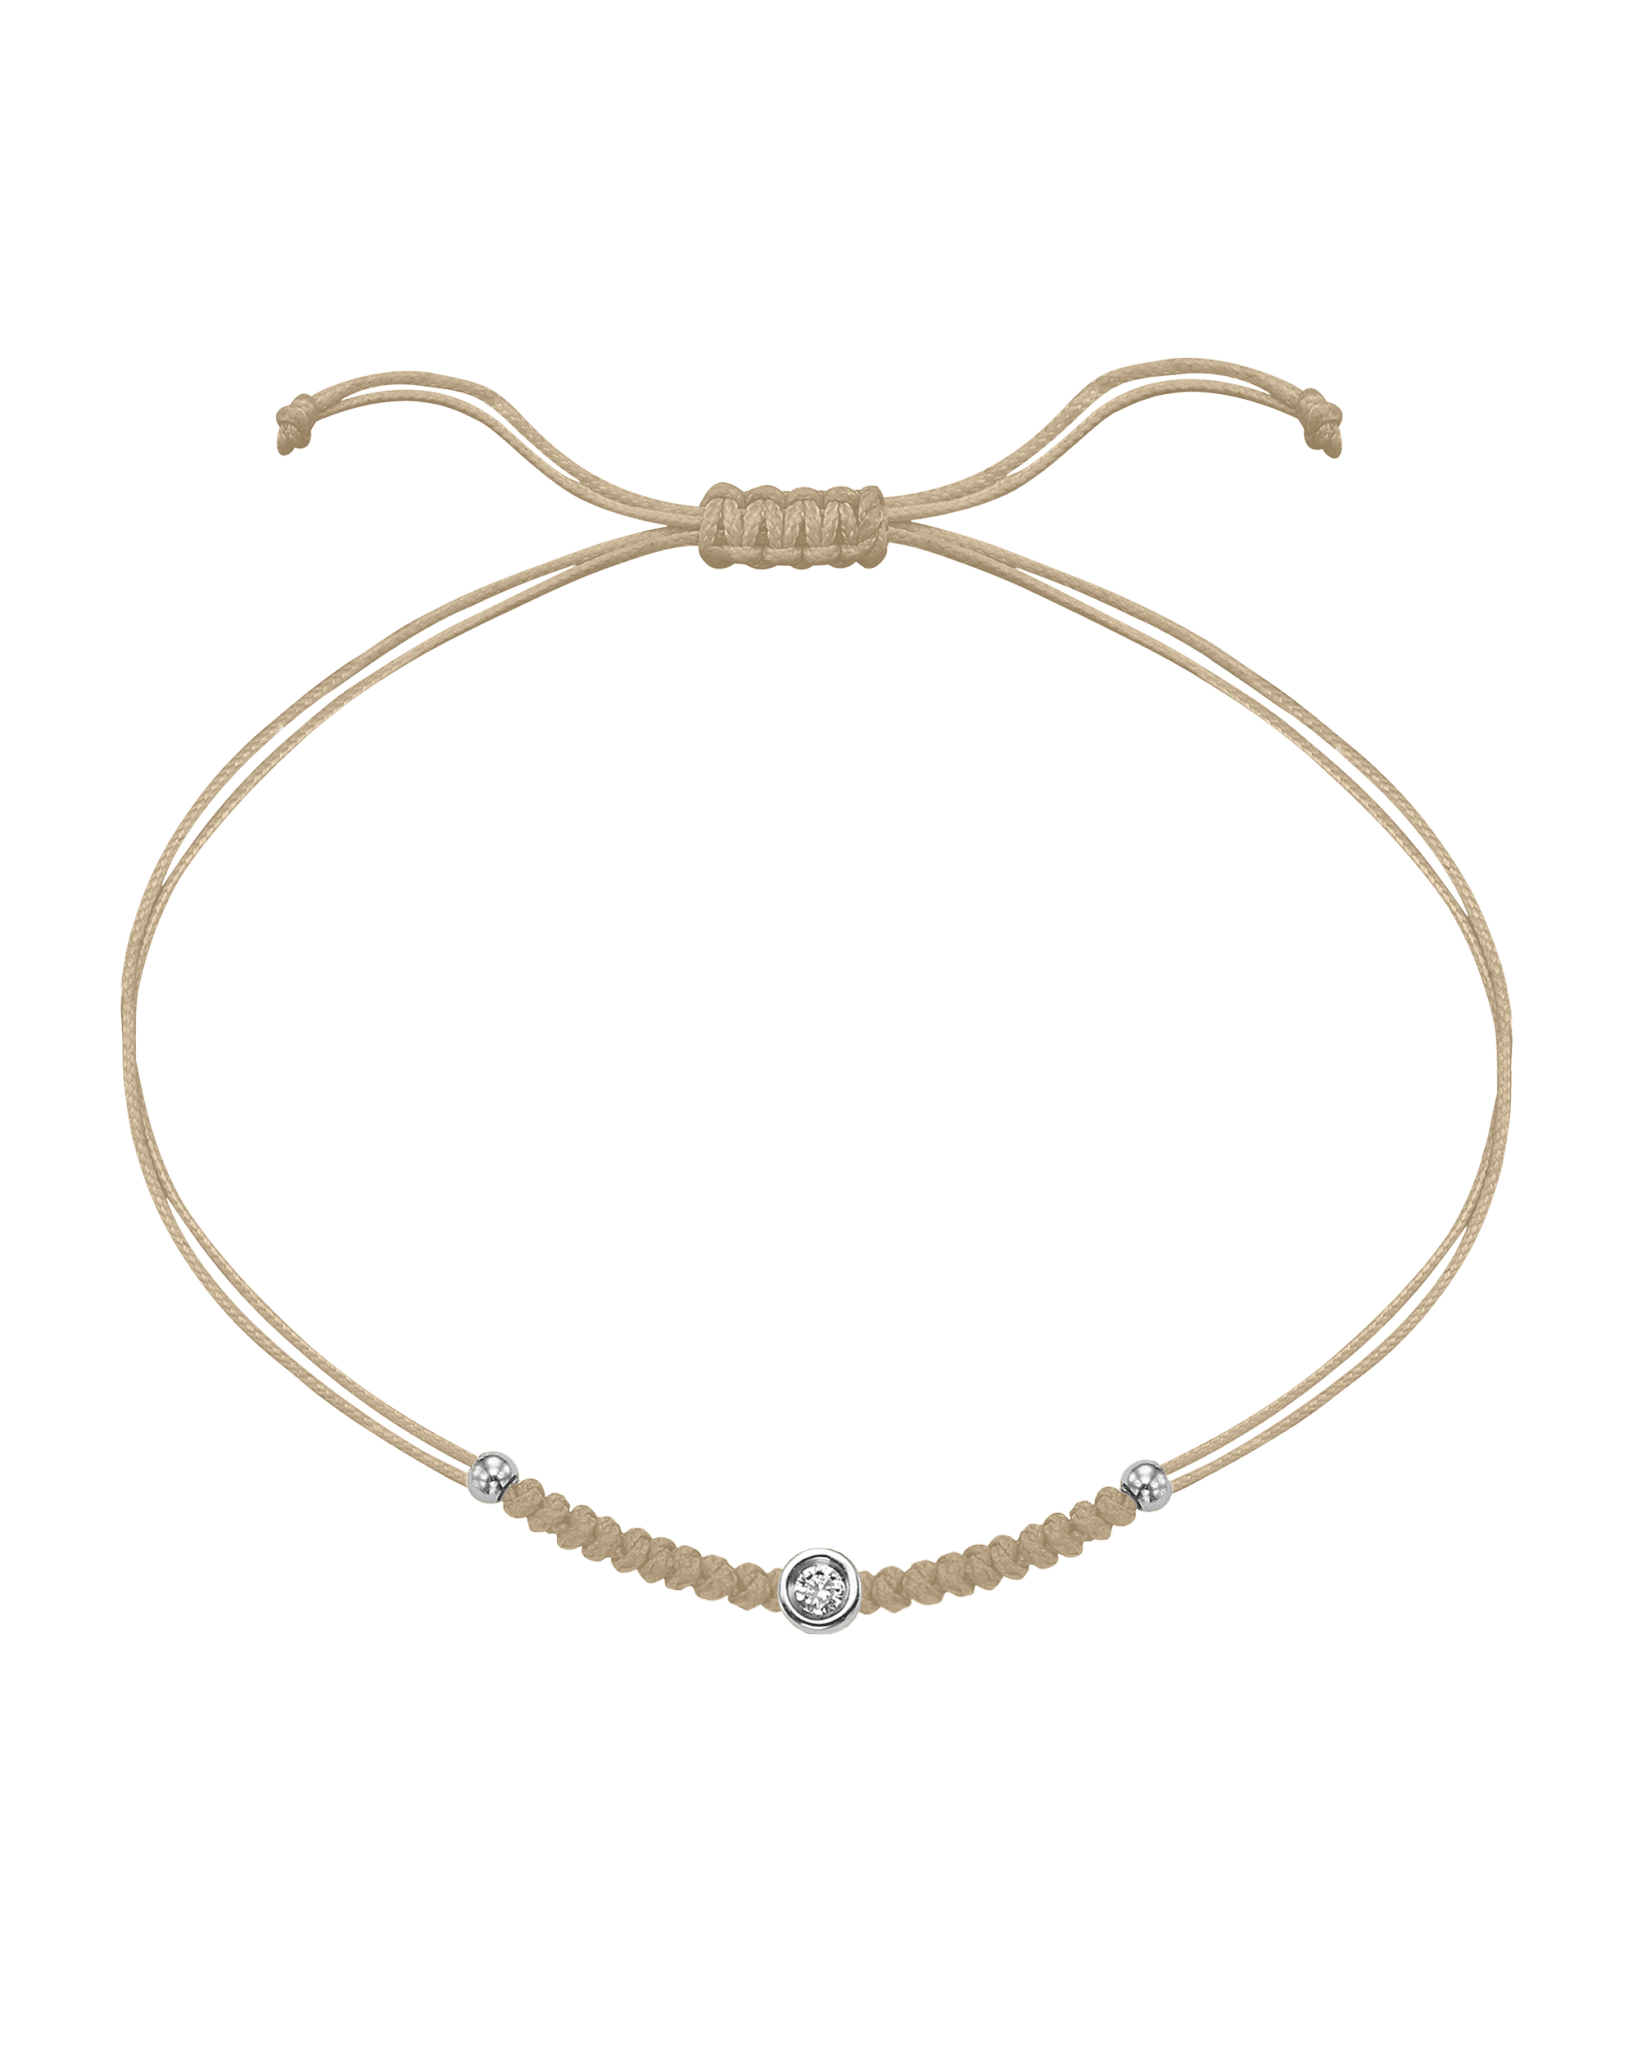 Solid Gold Sphere String of Love - 14K White Gold Bracelet 14K Solid Gold Beige Small: 0.03ct 